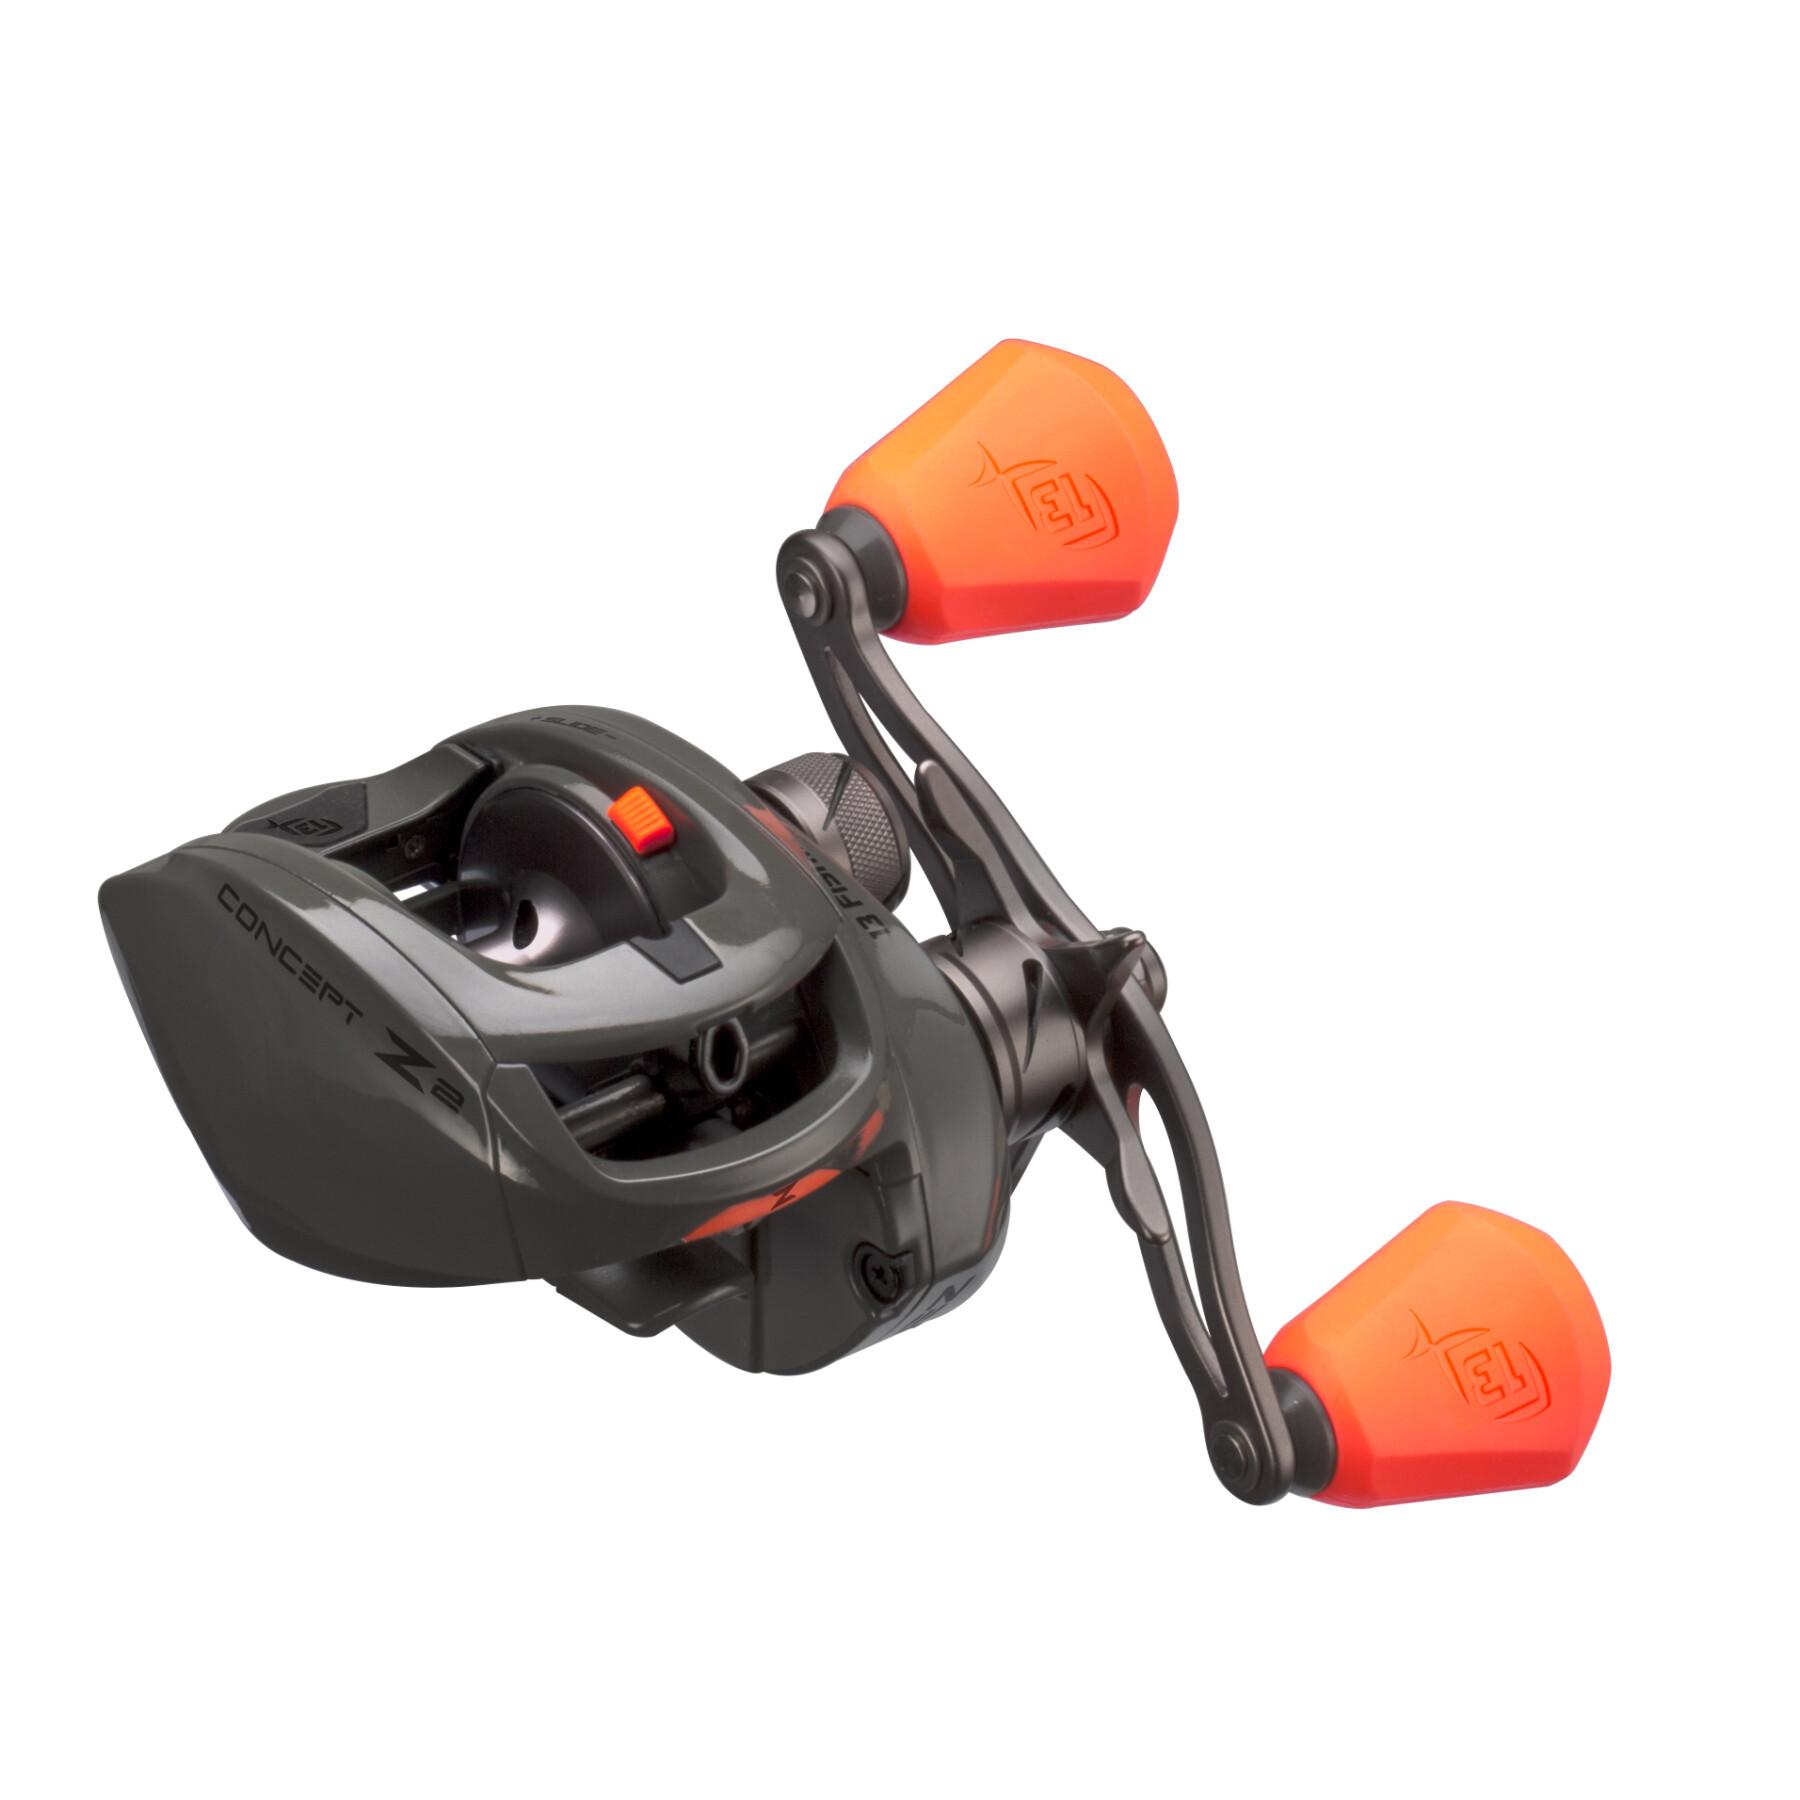 Moulinet 13 Fishing Concept Z sld 7.5:1 lh